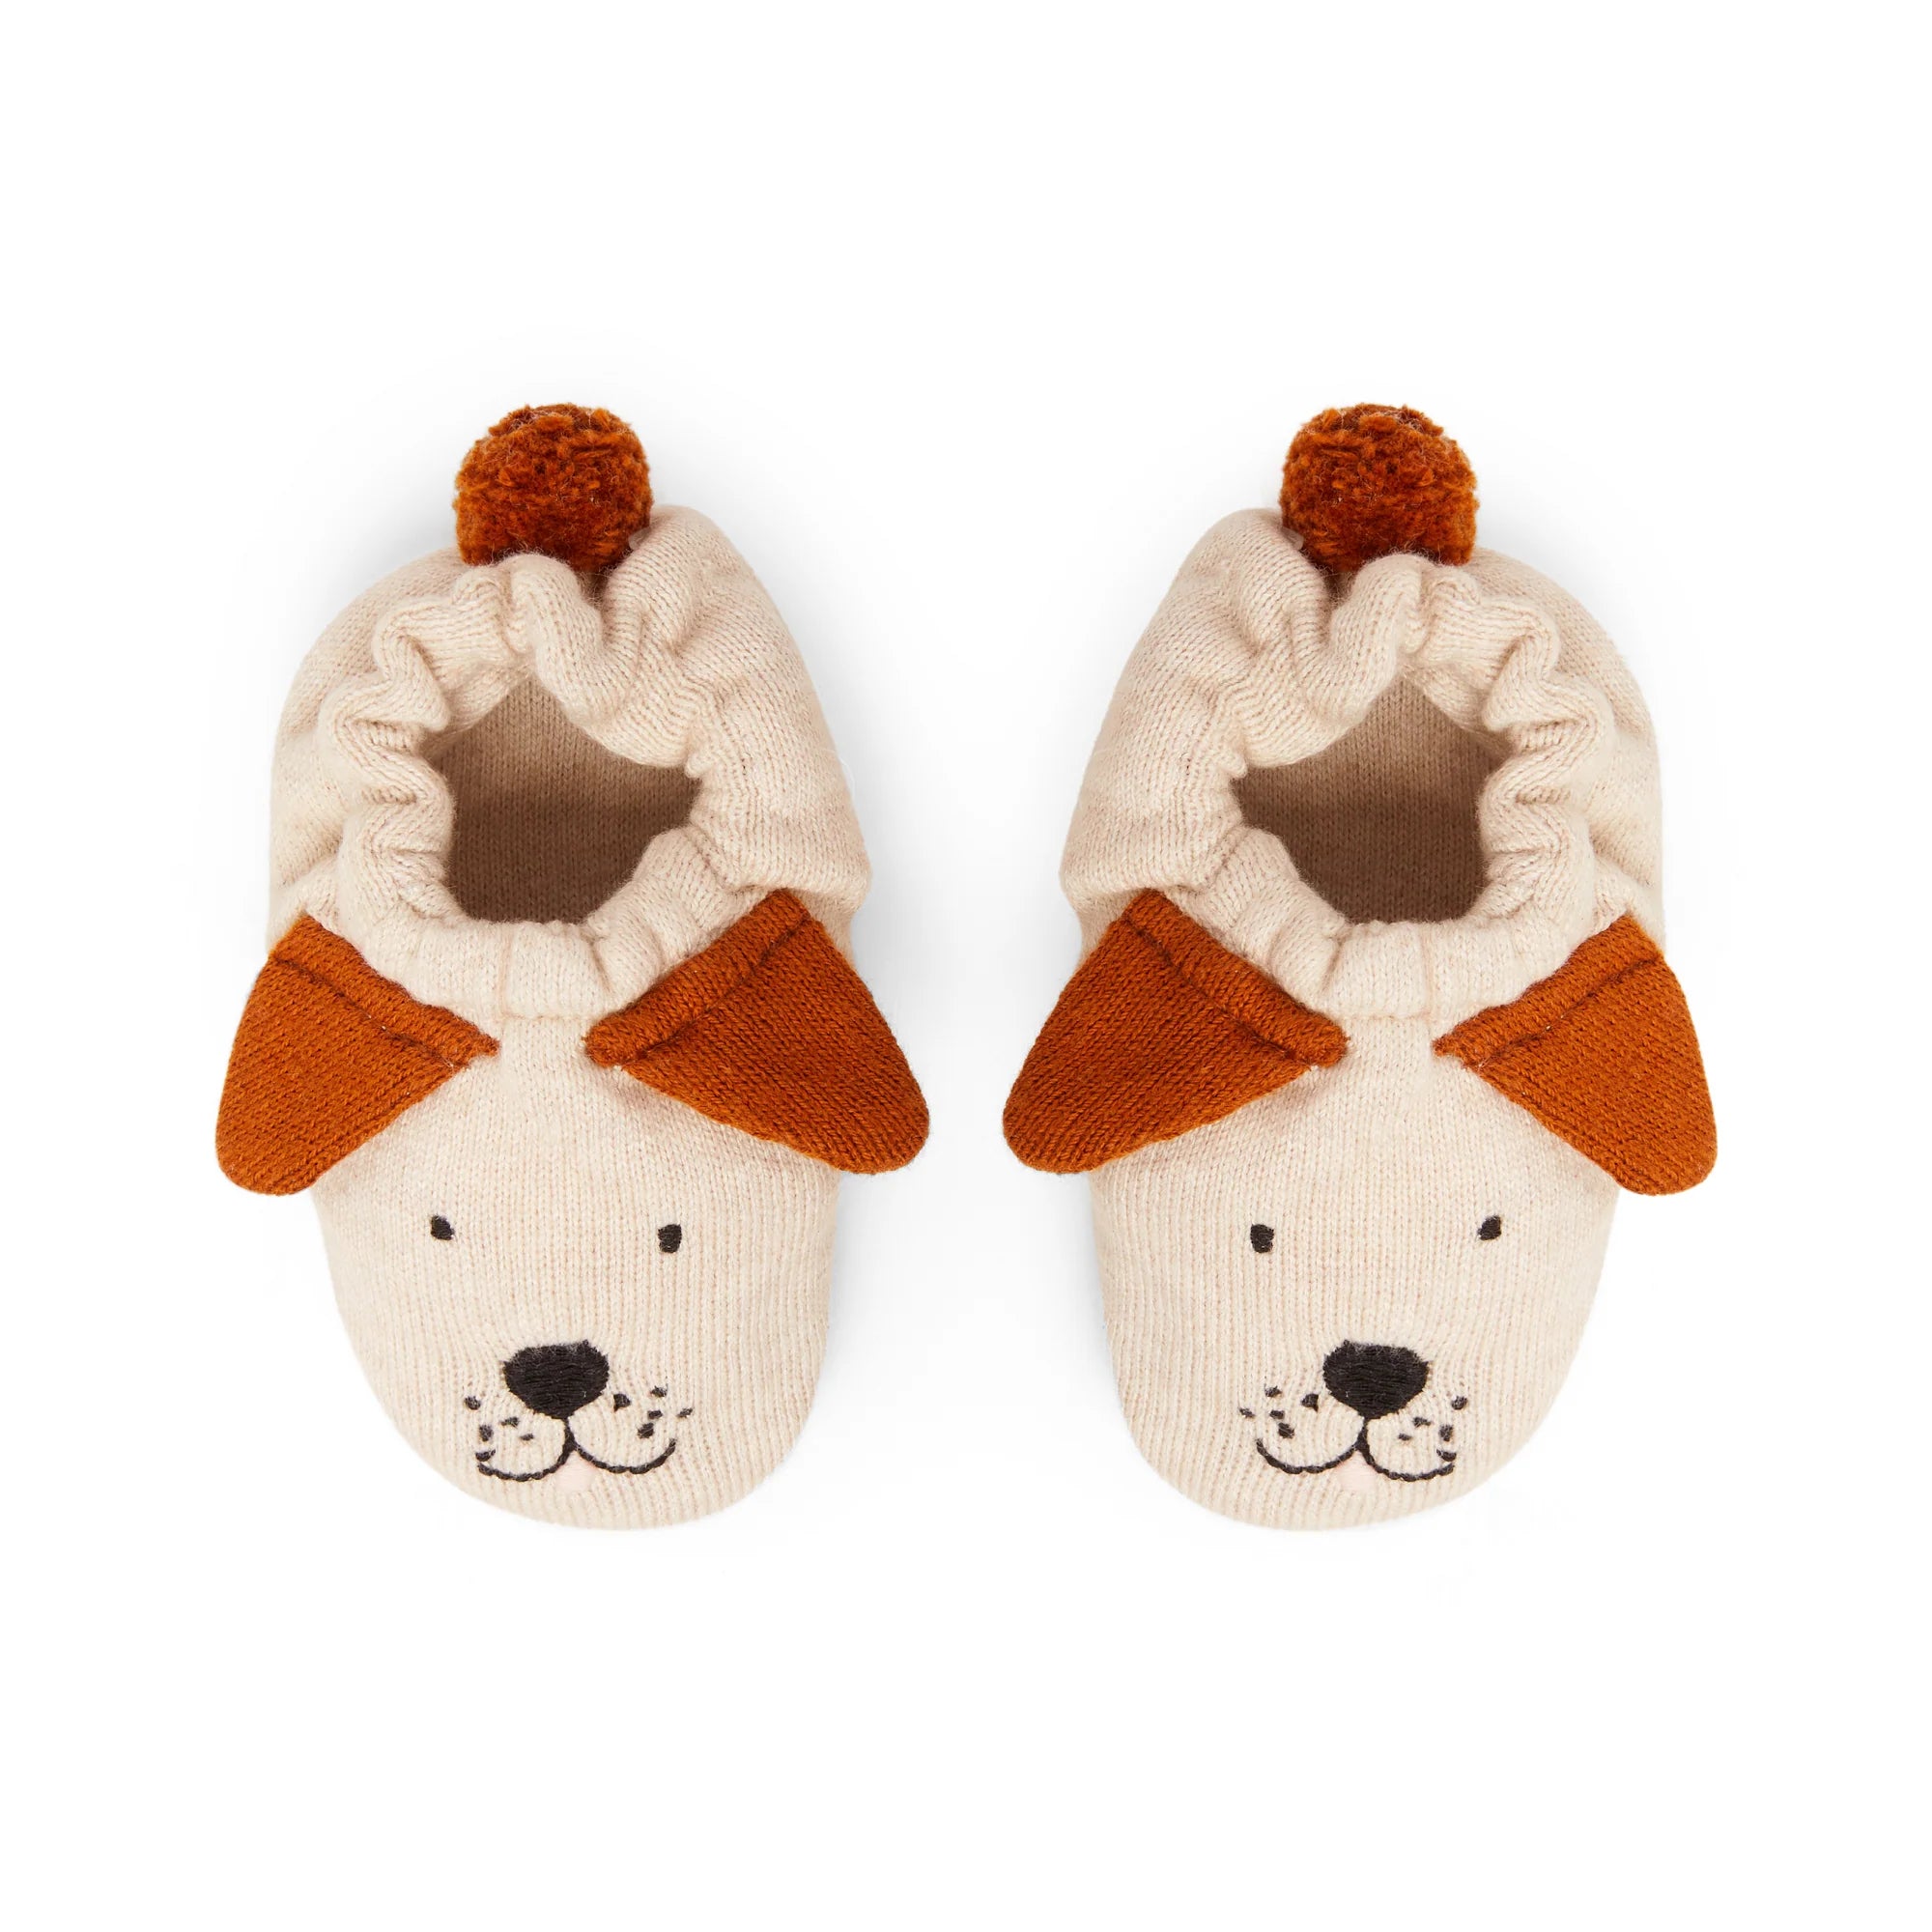 Dog Booties | Cotton | Kids | by Sophie Home - Lifestory - Sophie Home